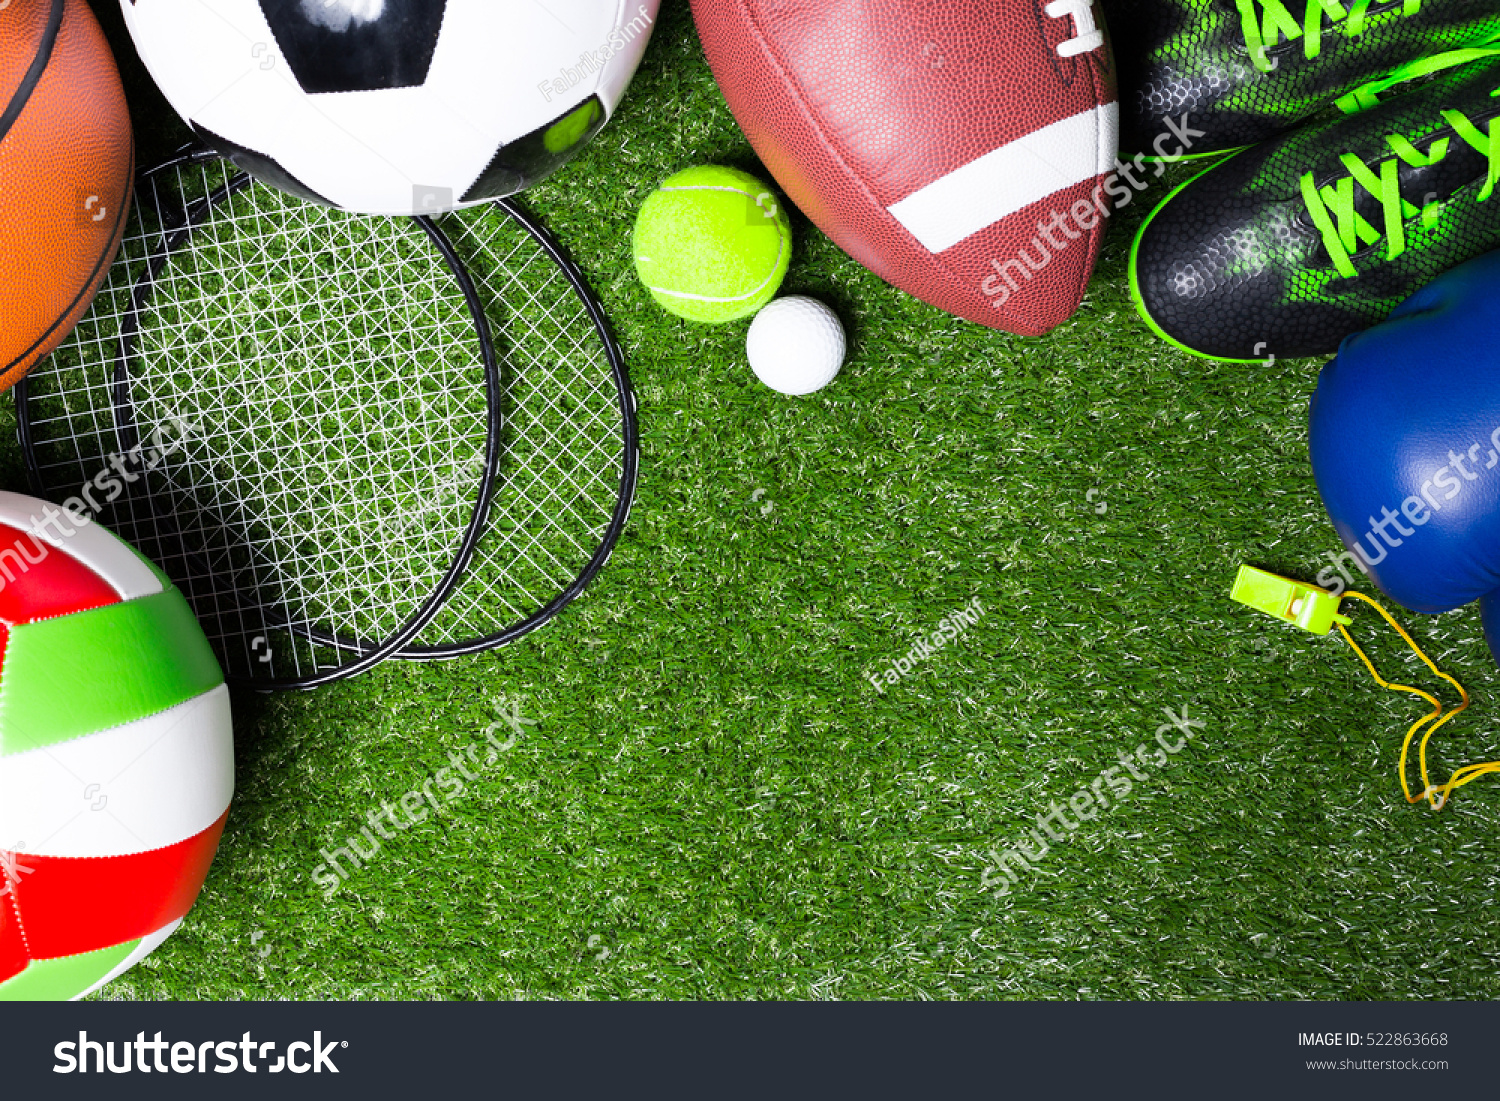 Various sport tools on grass #522863668